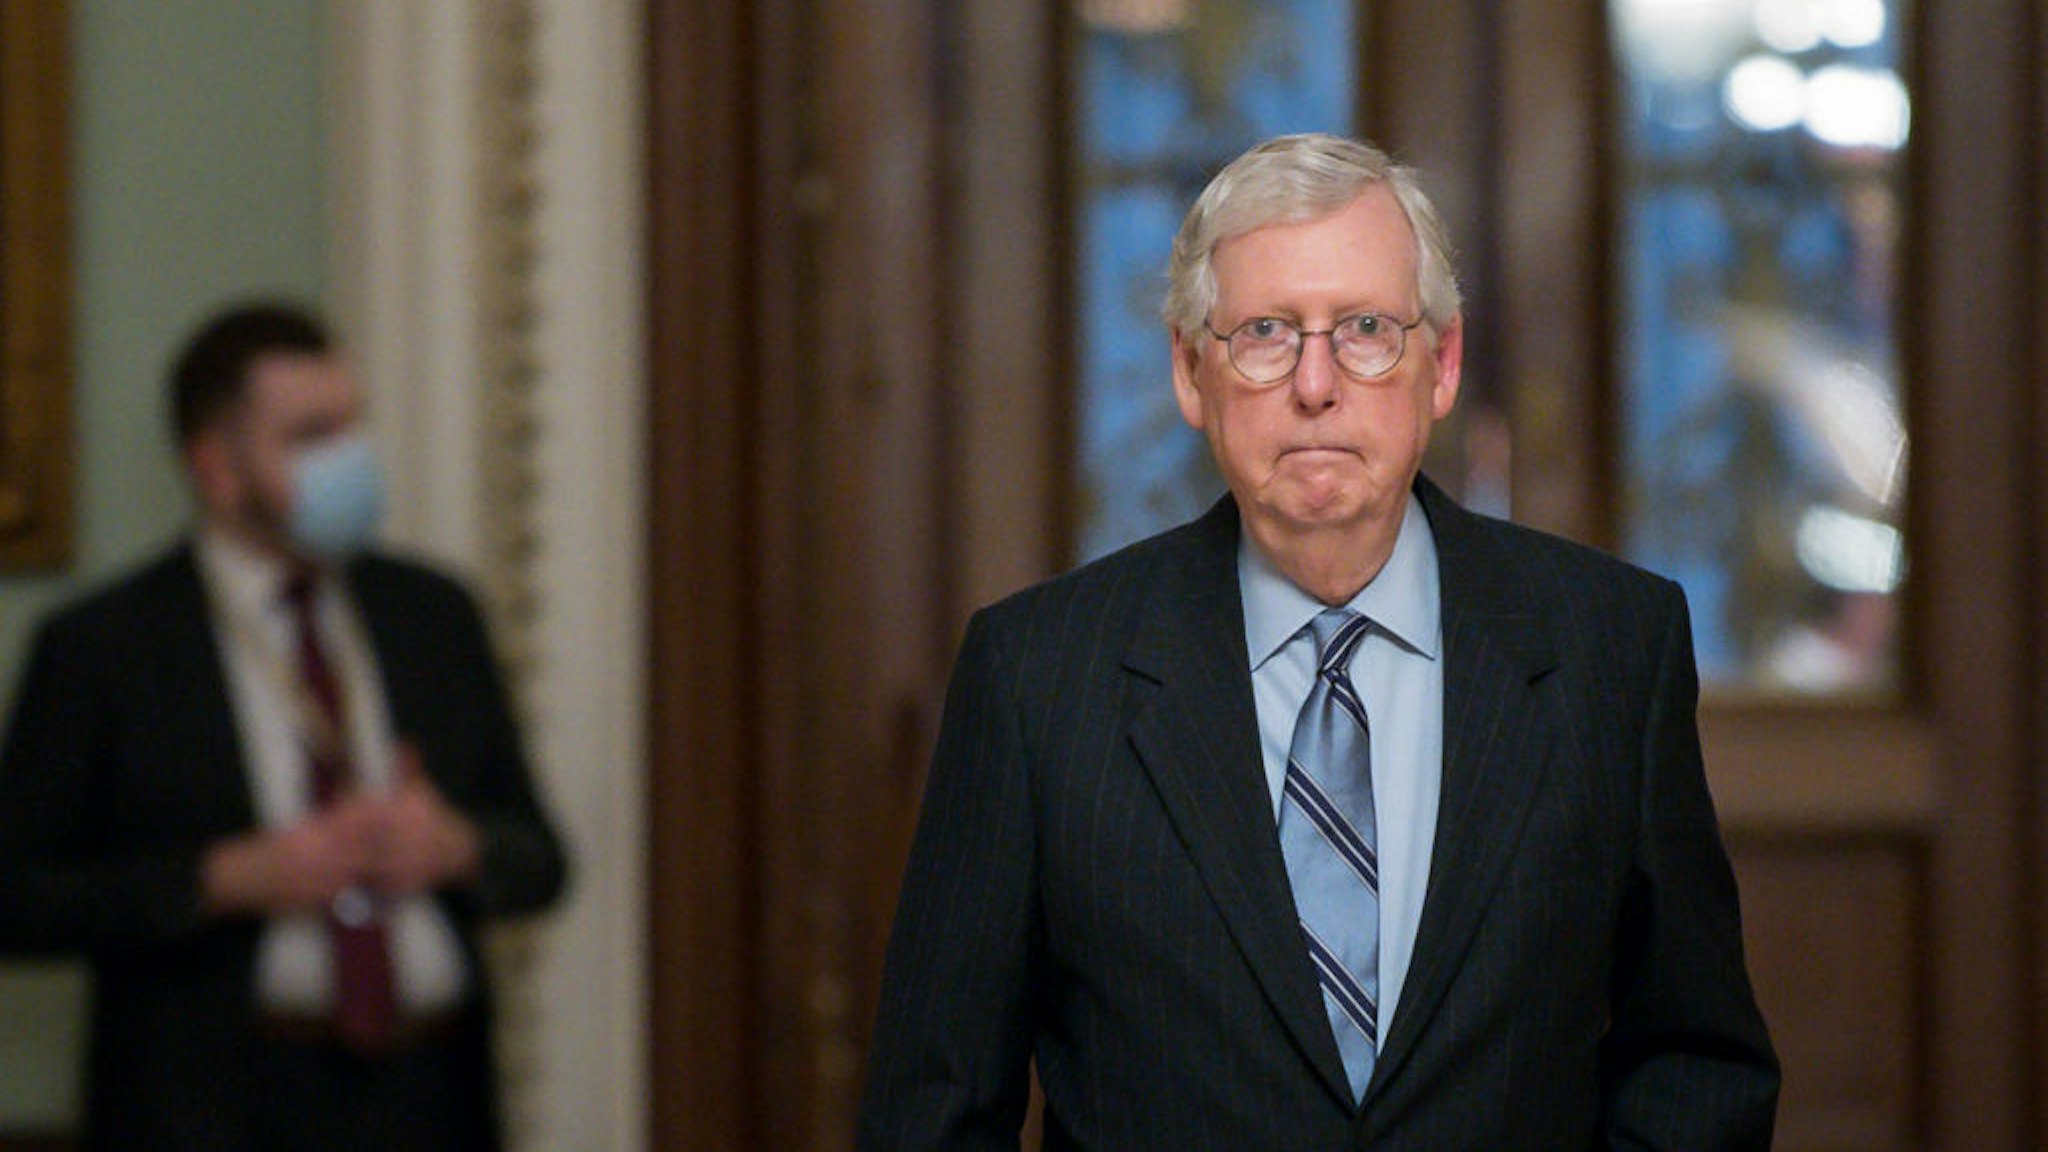 U.S. Senate Minority Leader Mitch McConnell (R-KY) leaves the Senate Chamber in the U.S. Capitol on August 11, 2021 in Washington, DC.